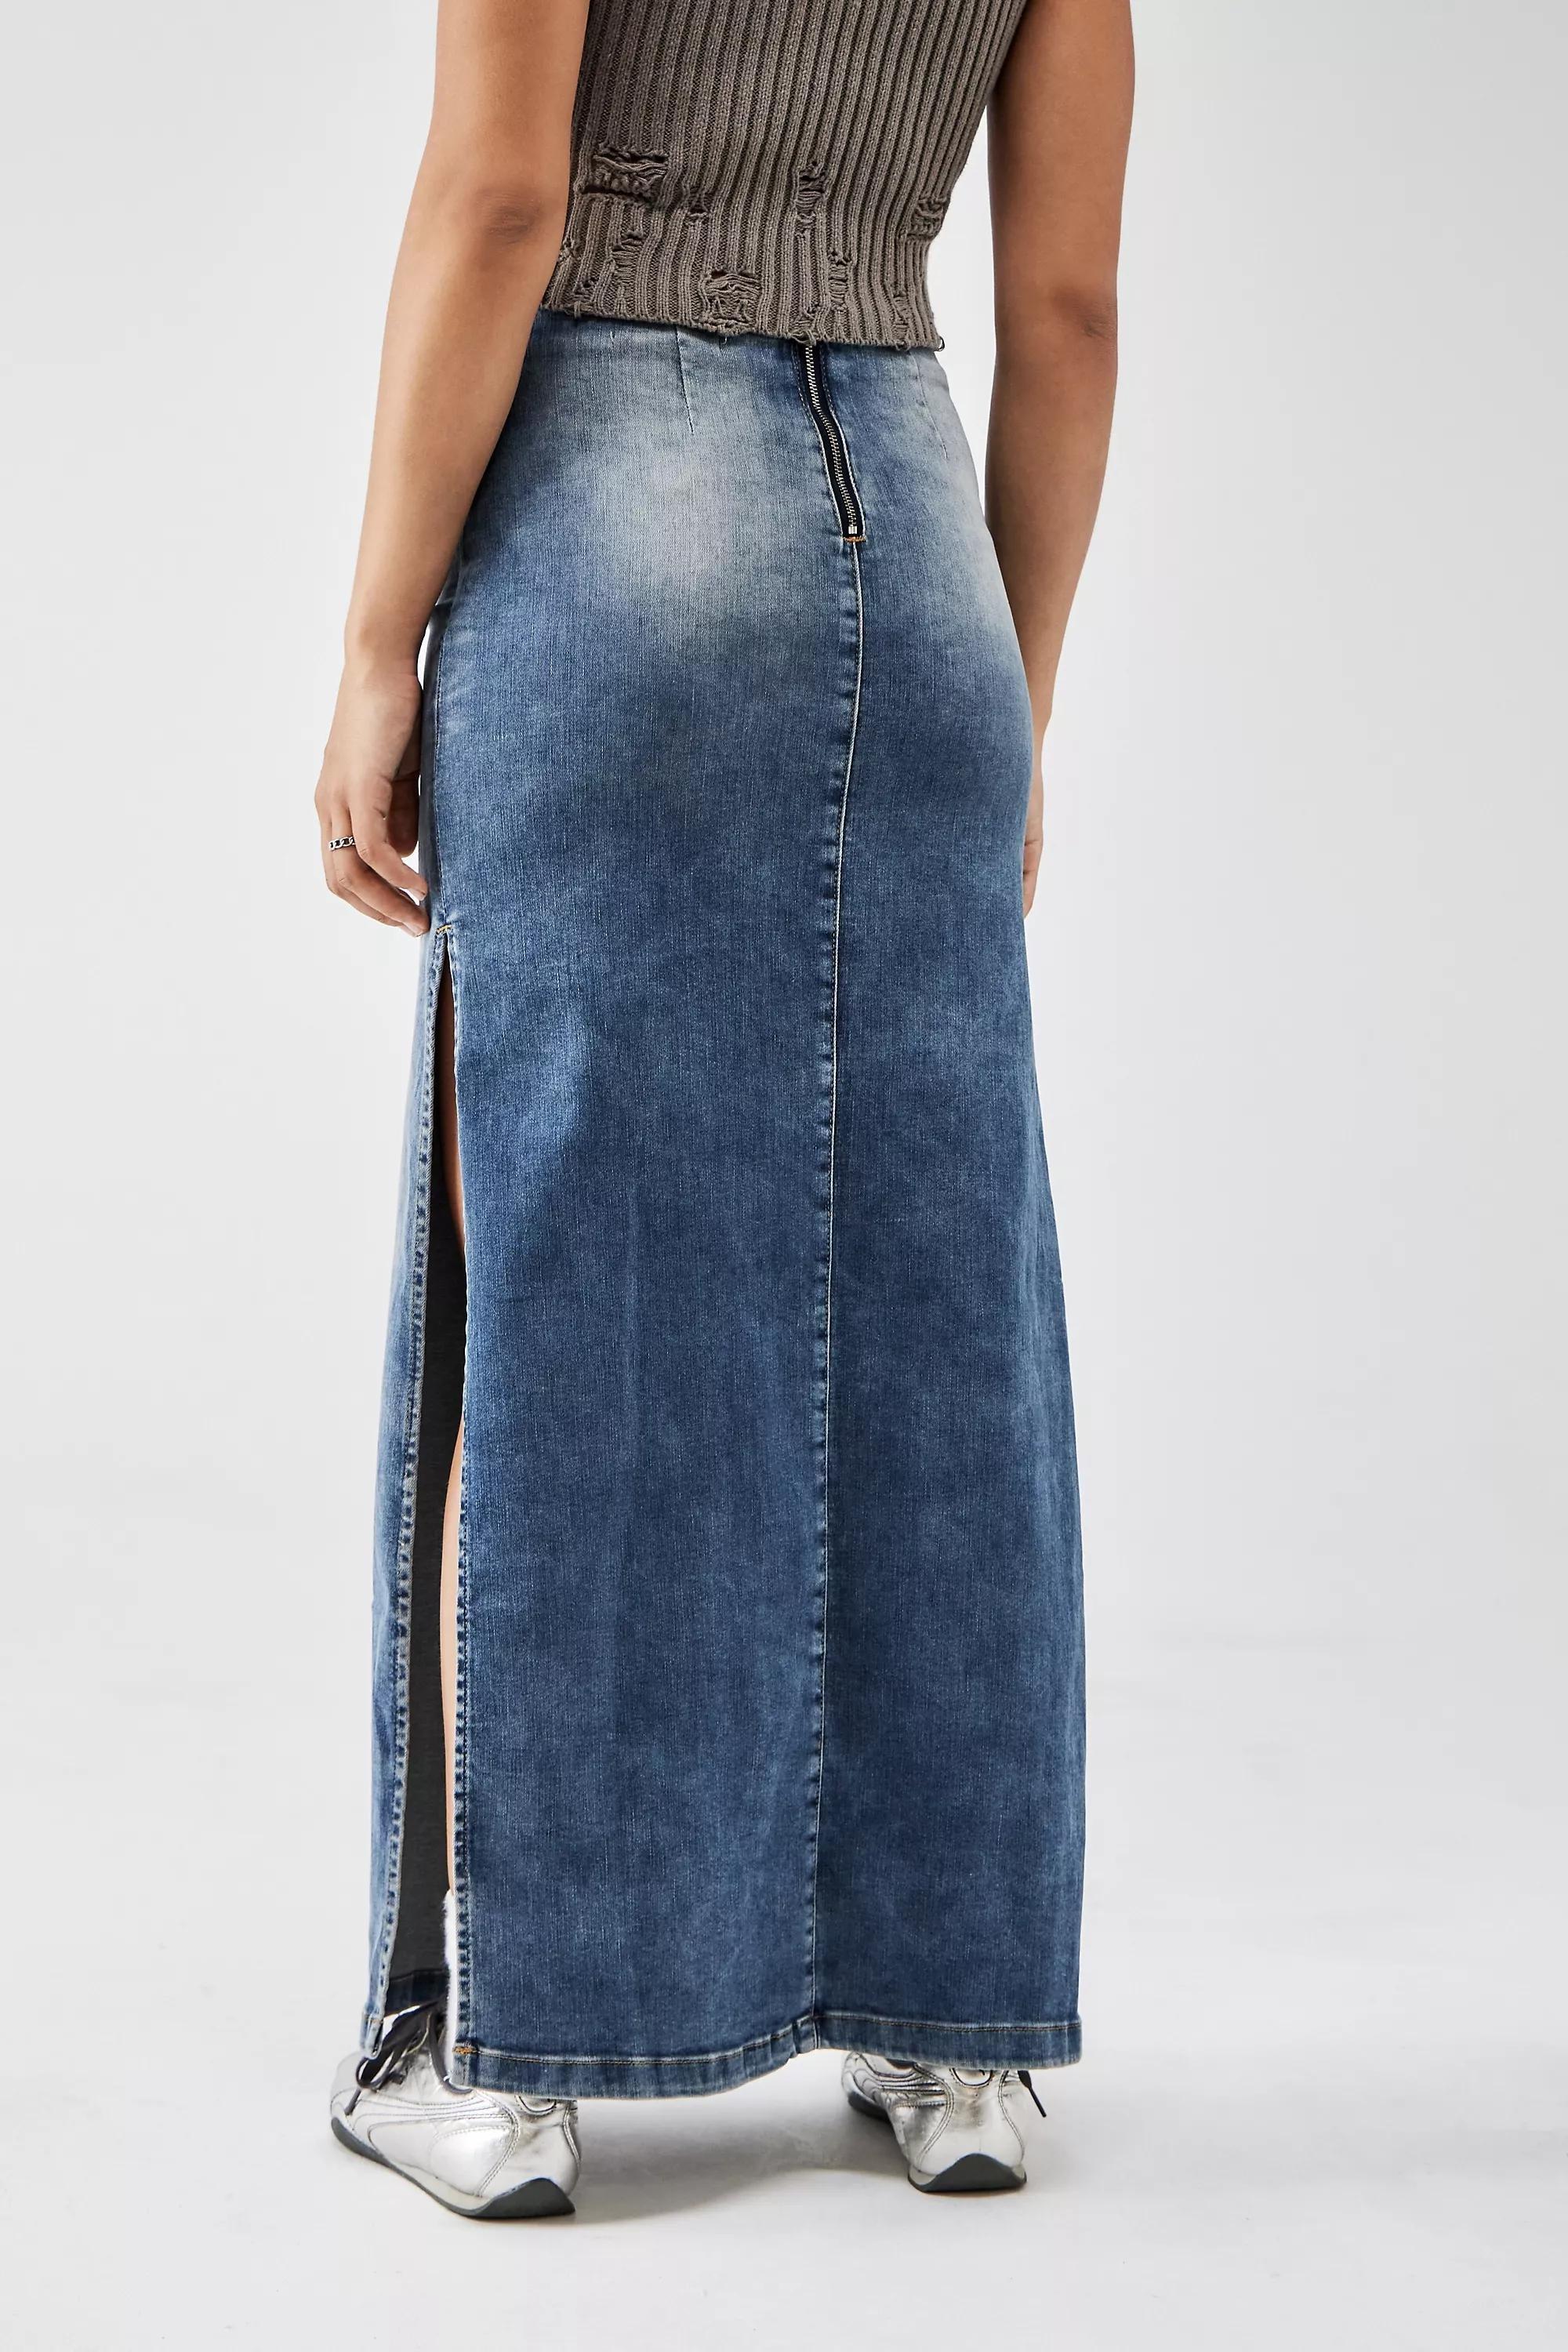 Urban Outfitters - Blue Bdg Belted Column Maxi Skirt